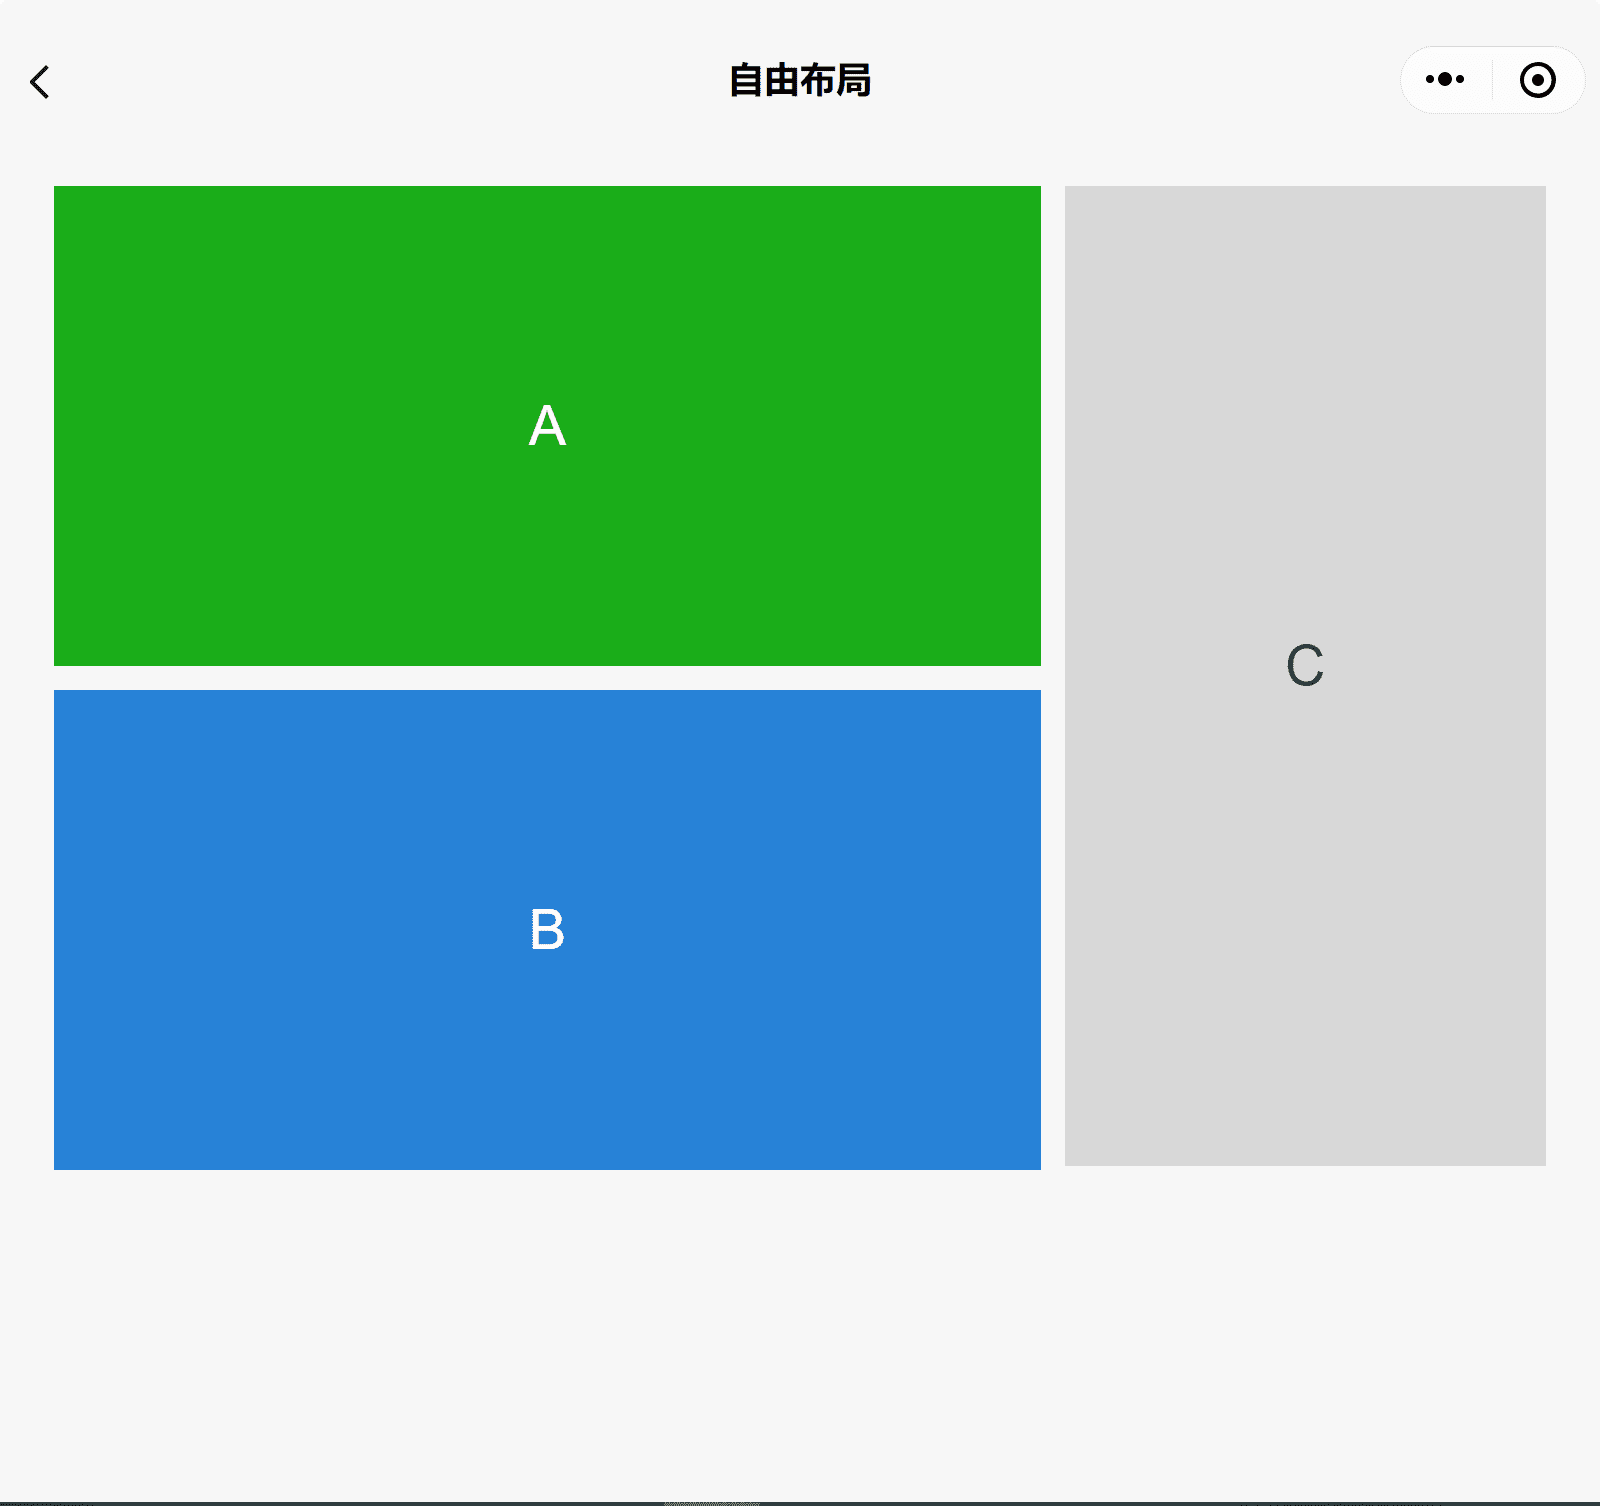 The WeChat components demo app in a wide window showing three boxes A, B, and C with A stacked on top of B and C on the side.